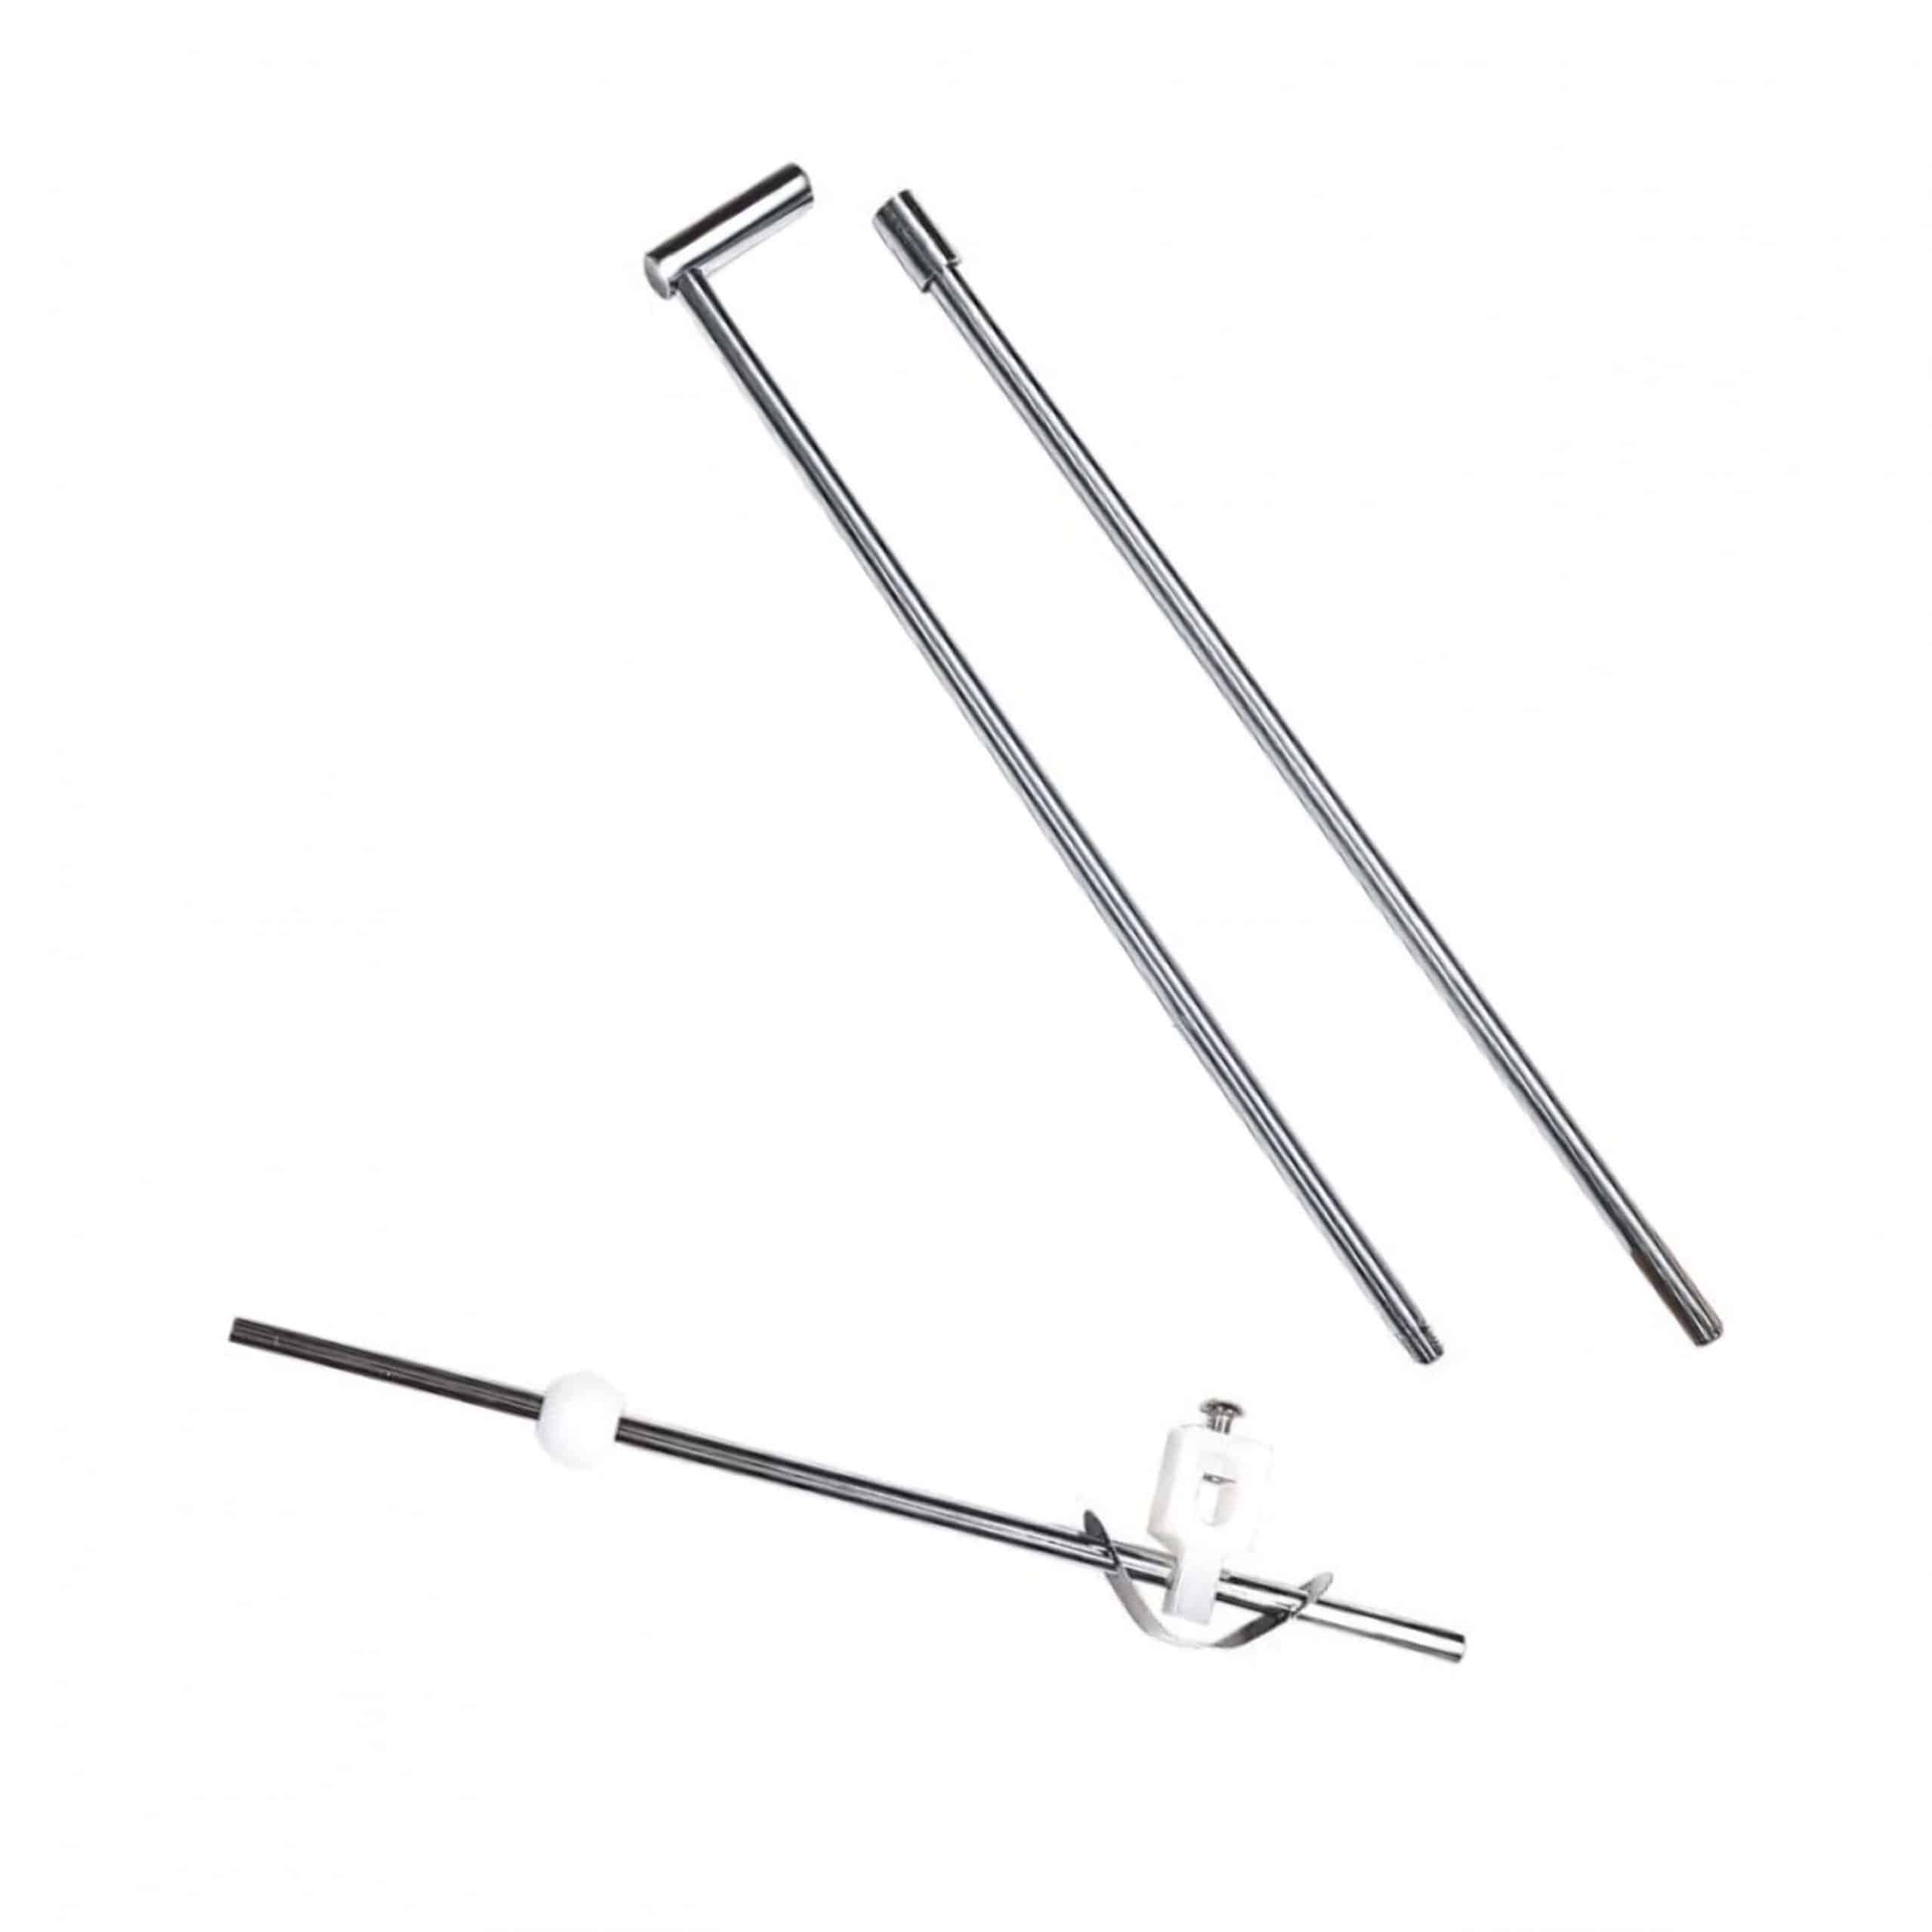 9in Clevis Strap Rapid Repair Pop-Up Lift Rod & Linkage Kit 1 Set Chrome Plated Finish 8in Rod 